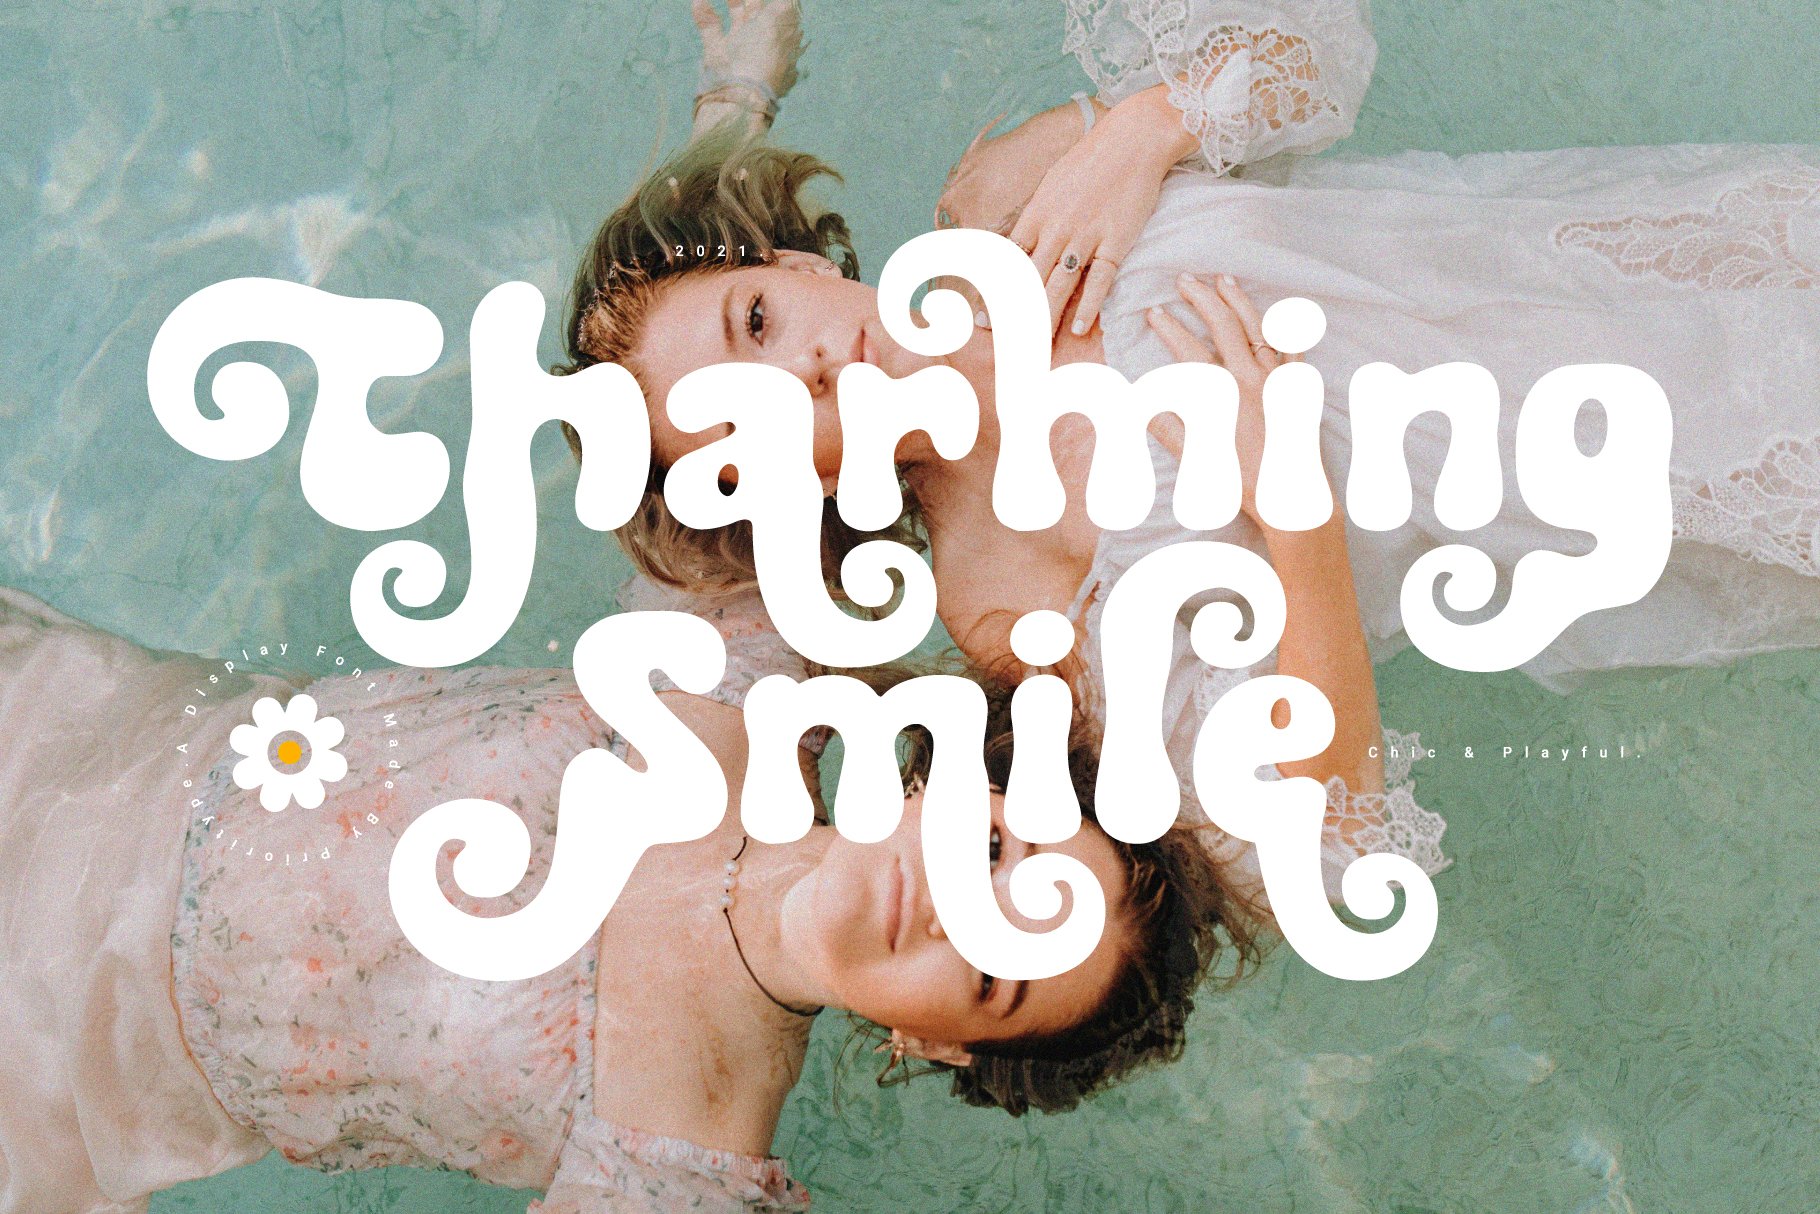 Charming Smile cover image.